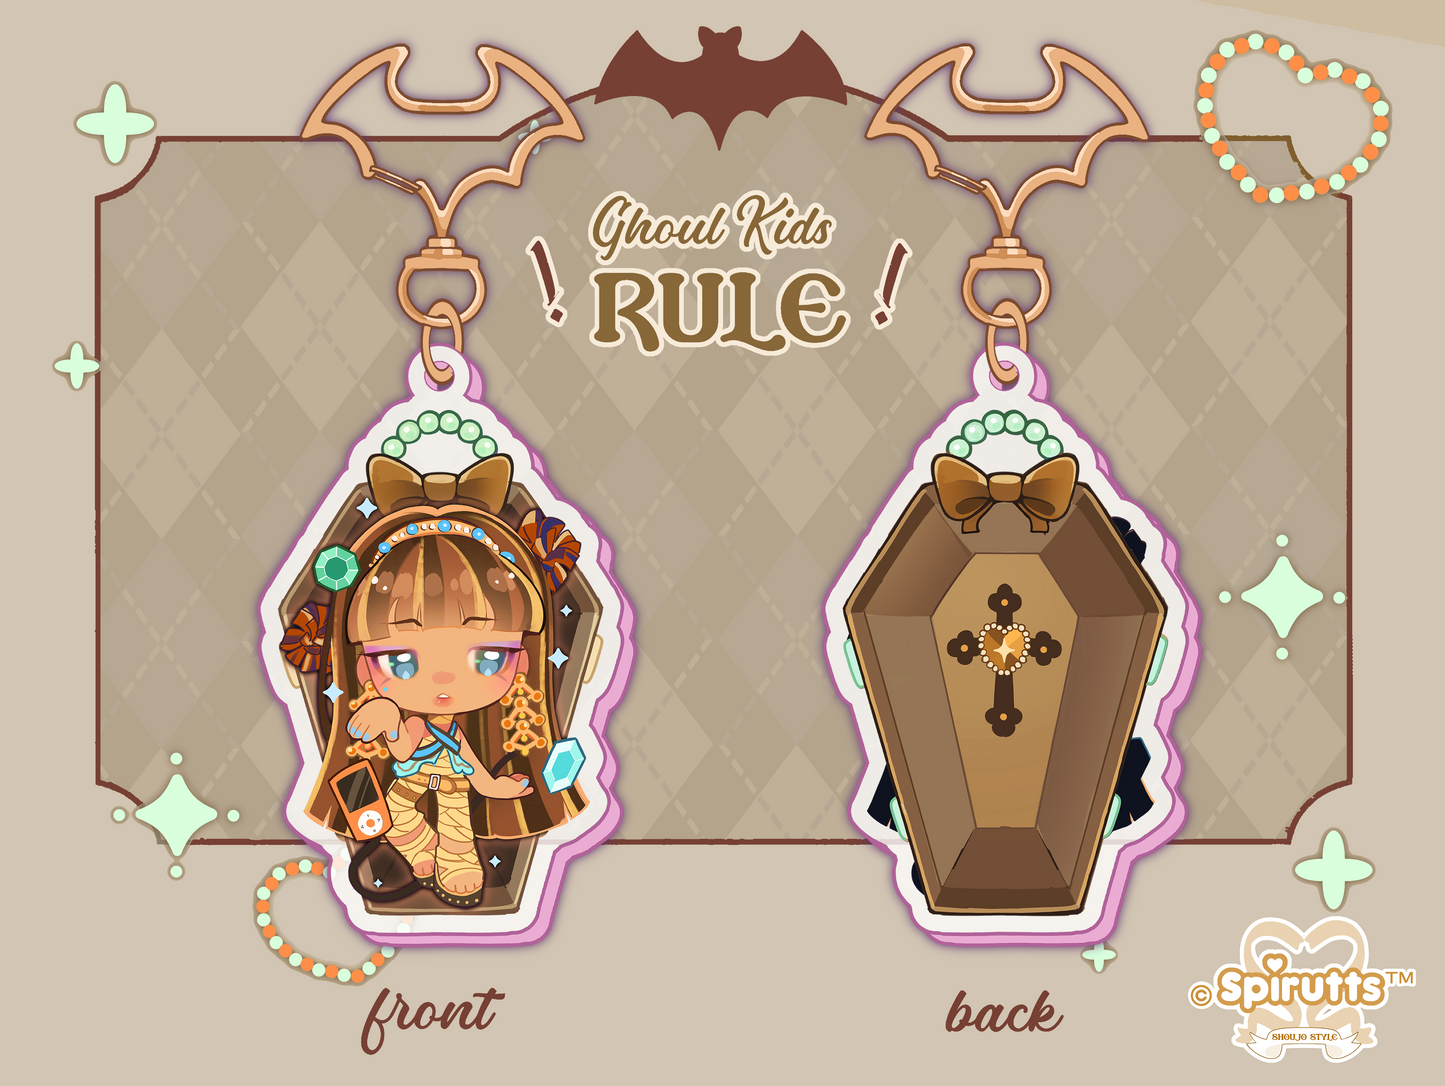 KEYCHAIN(S) - Ghoul gals!  - Double-sided acrylic/Bat-shaped Gold Chain/Charm